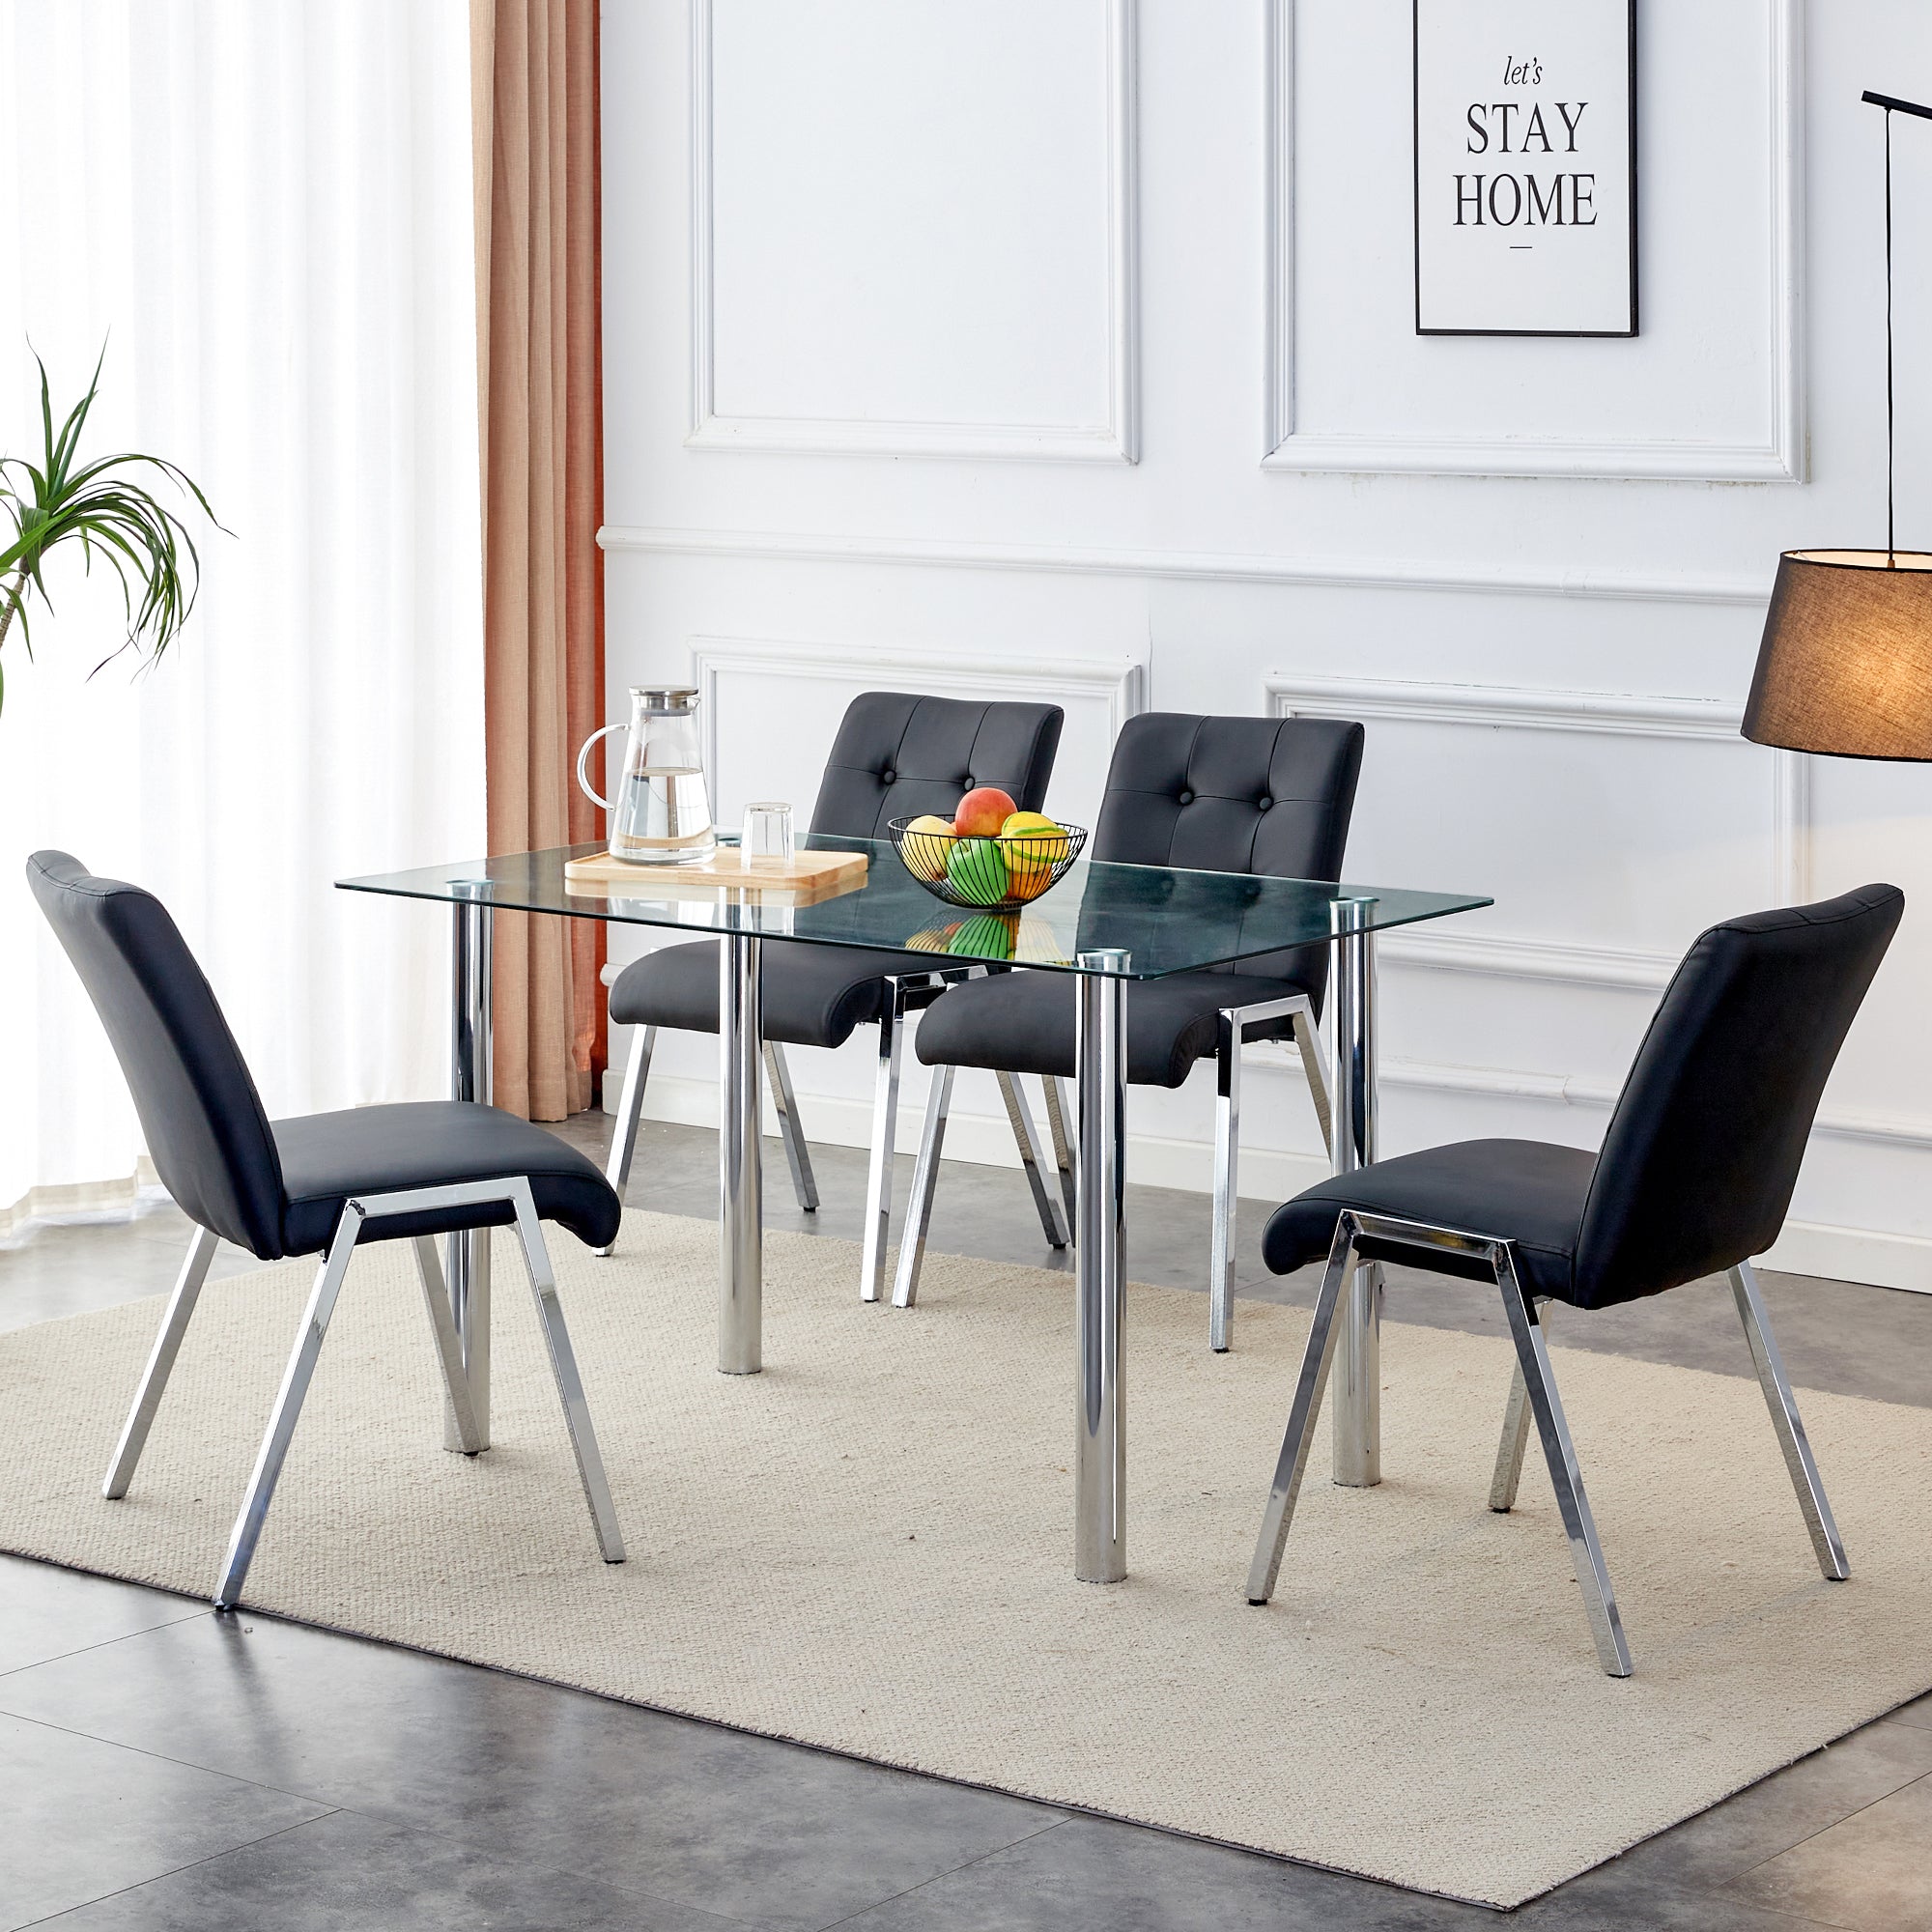 Set of 4pc Modern Black Faux Leather Dining Chairs with Chromed Metal Legs